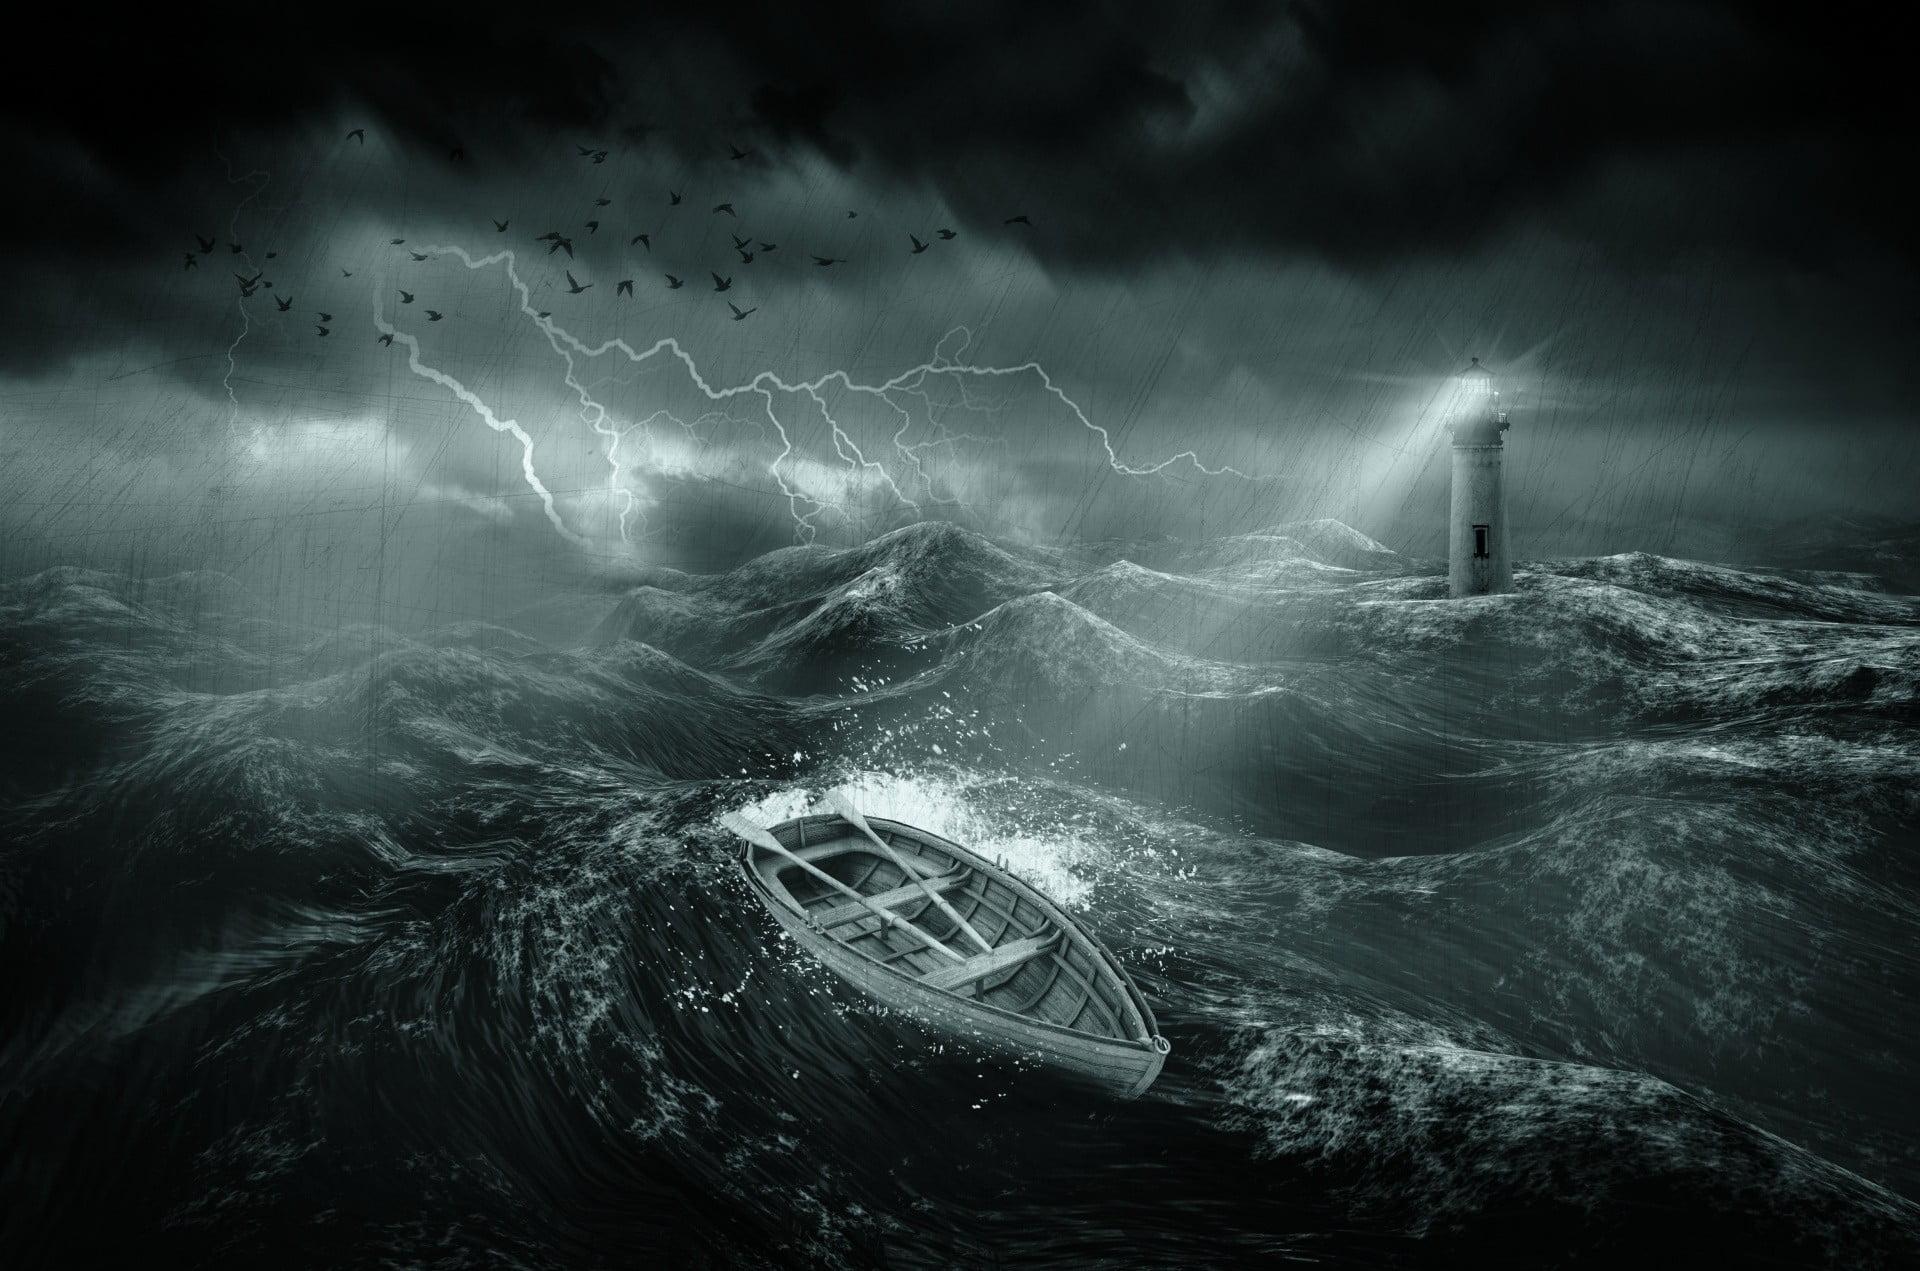 Illustration of stormy seas with lighthouse and clinker boat, nature